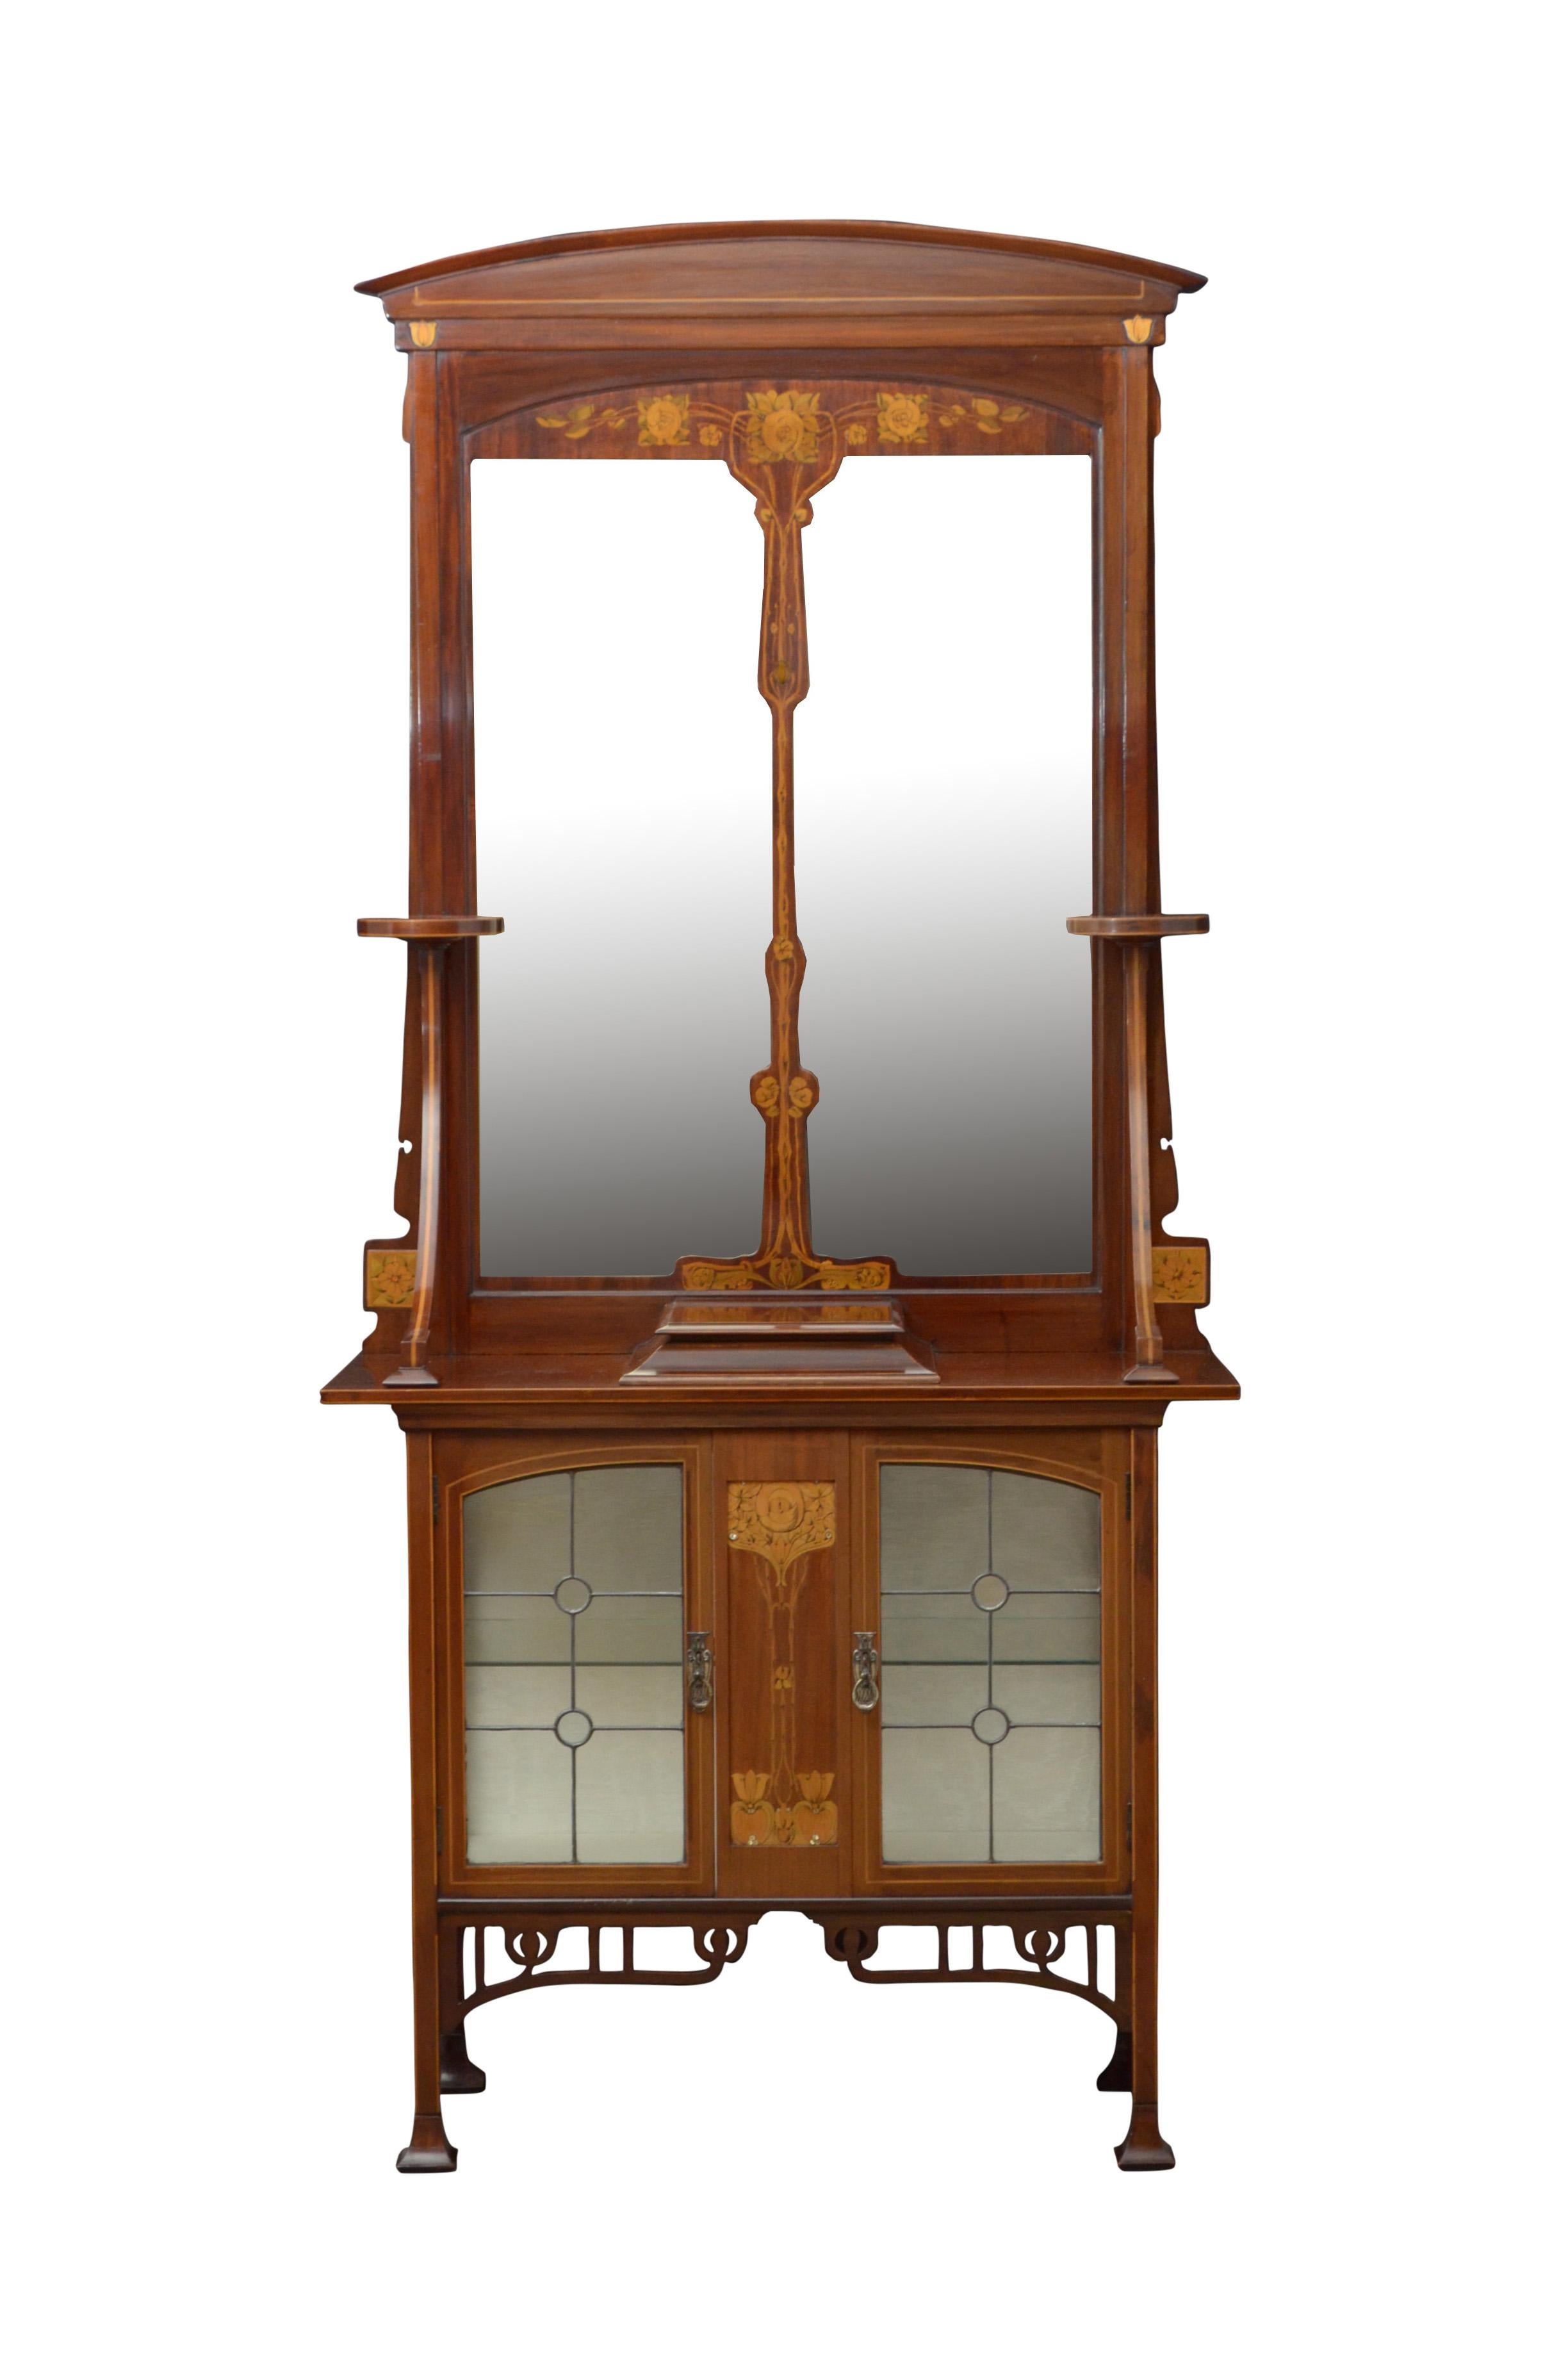 Two superb Art Nouveau mahogany and inlaid cabinets with mirrors.
Art Nouveau mahogany and marquetry hall cabinets, each having arched cresting above divided mirror flanked by a pair of circular platforms on downswept supports, the projecting base